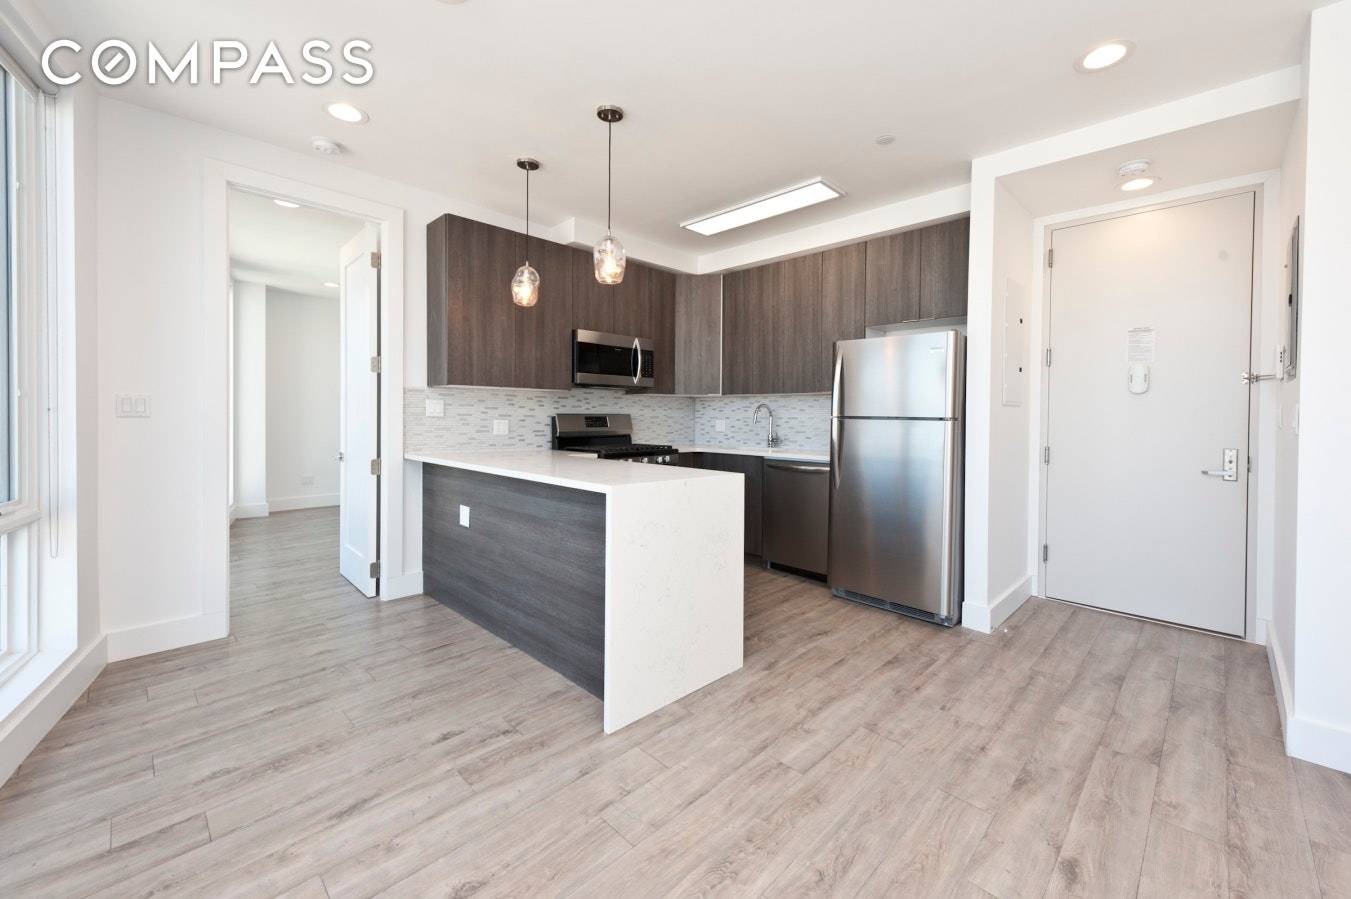 Brand spanking new building Next to Astoria Park South 2 bedroom apt on the fourth floor King and queen size bedrooms Over sized windows Heated floors Two full bathrooms Two ...